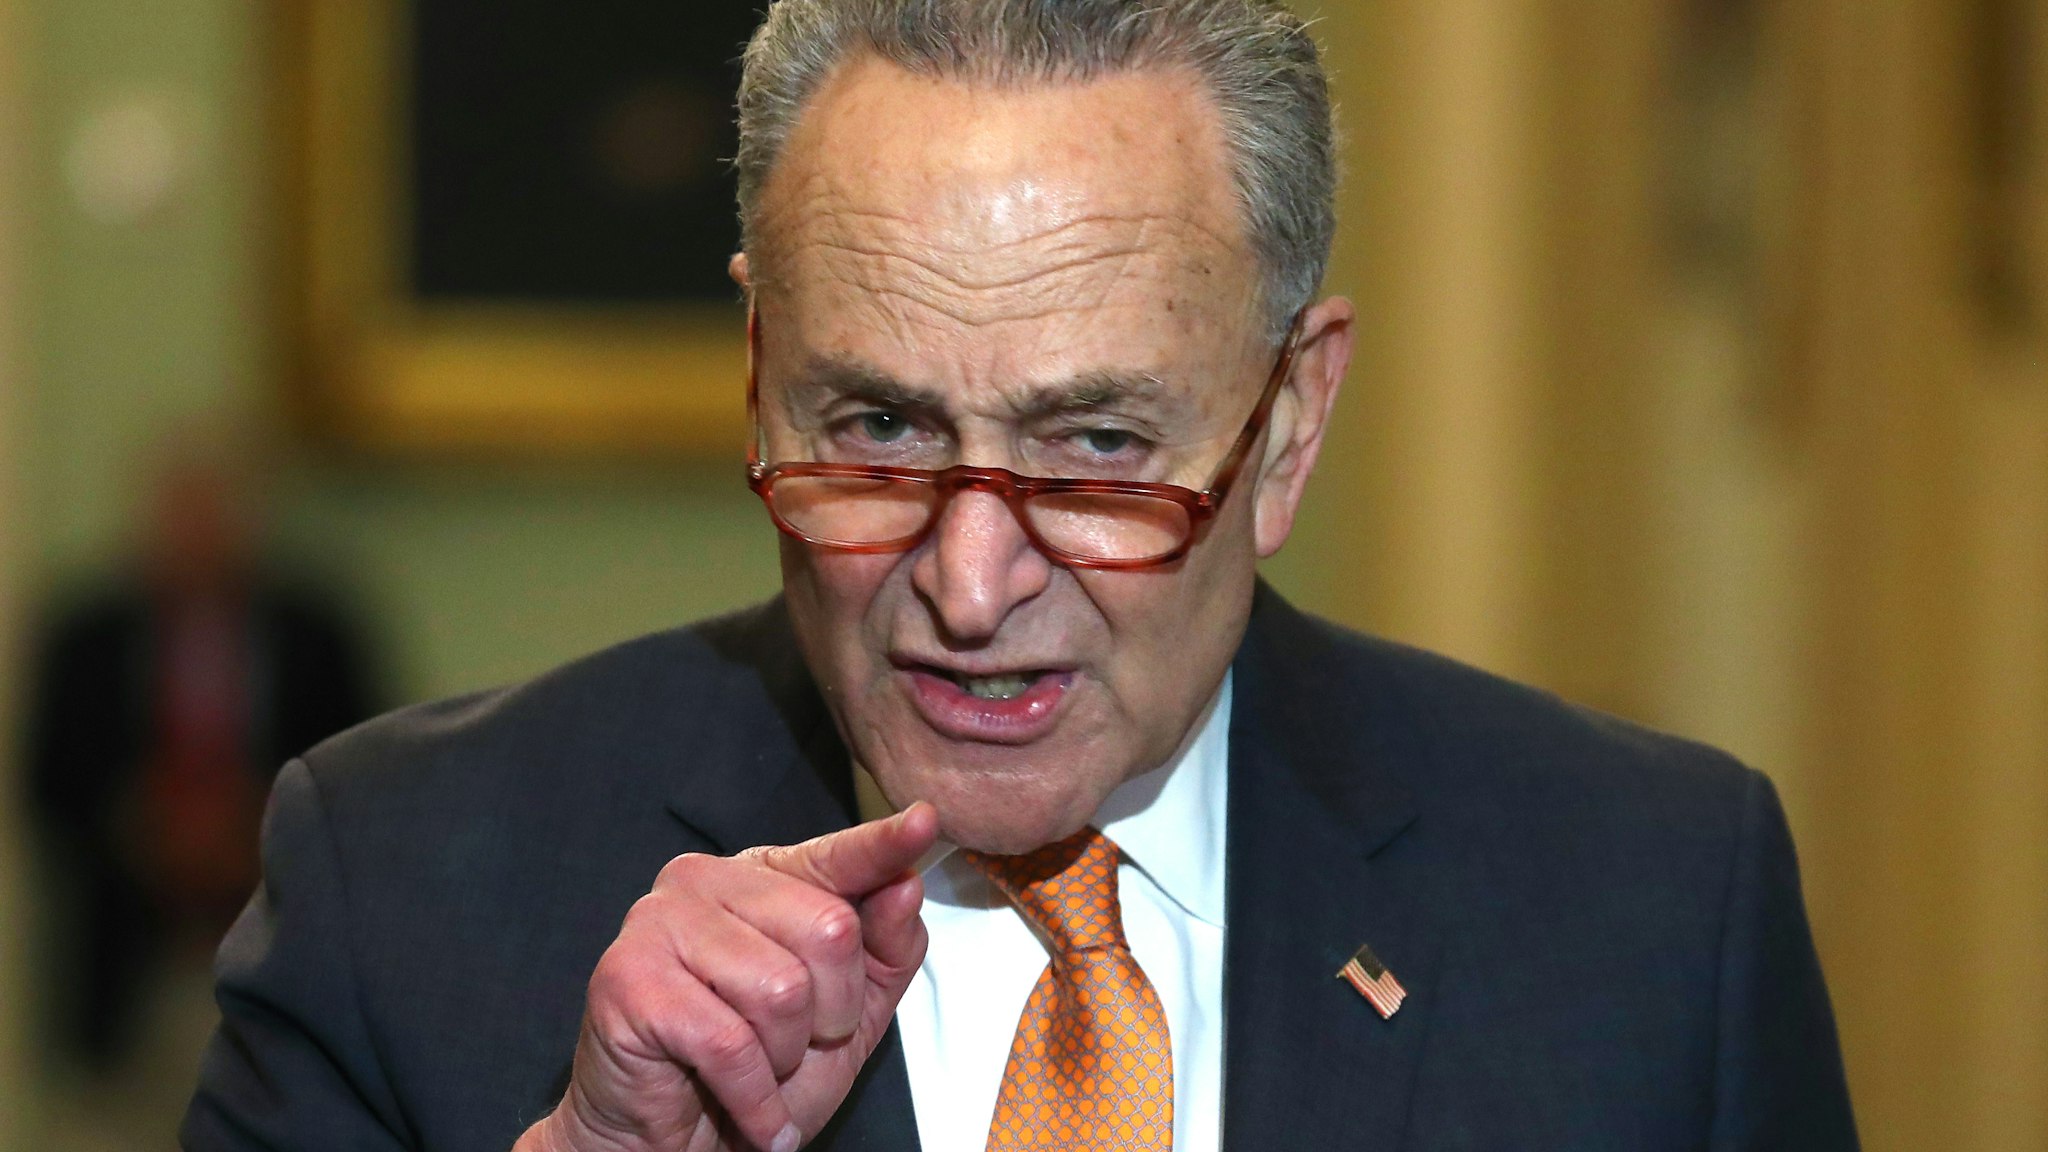 WASHINGTON, DC - DECEMBER 17: Senate Minority Leader Charles Schumer (D-NY) speaks to the media after attending the Senate Democrats policy luncheon on Capitol Hill, on December 17, 2019m in Washington, DC. Leader Schumer spoke about his request to have witnesses at the Senate Impeachment trial of U.S. President Donald Trump.